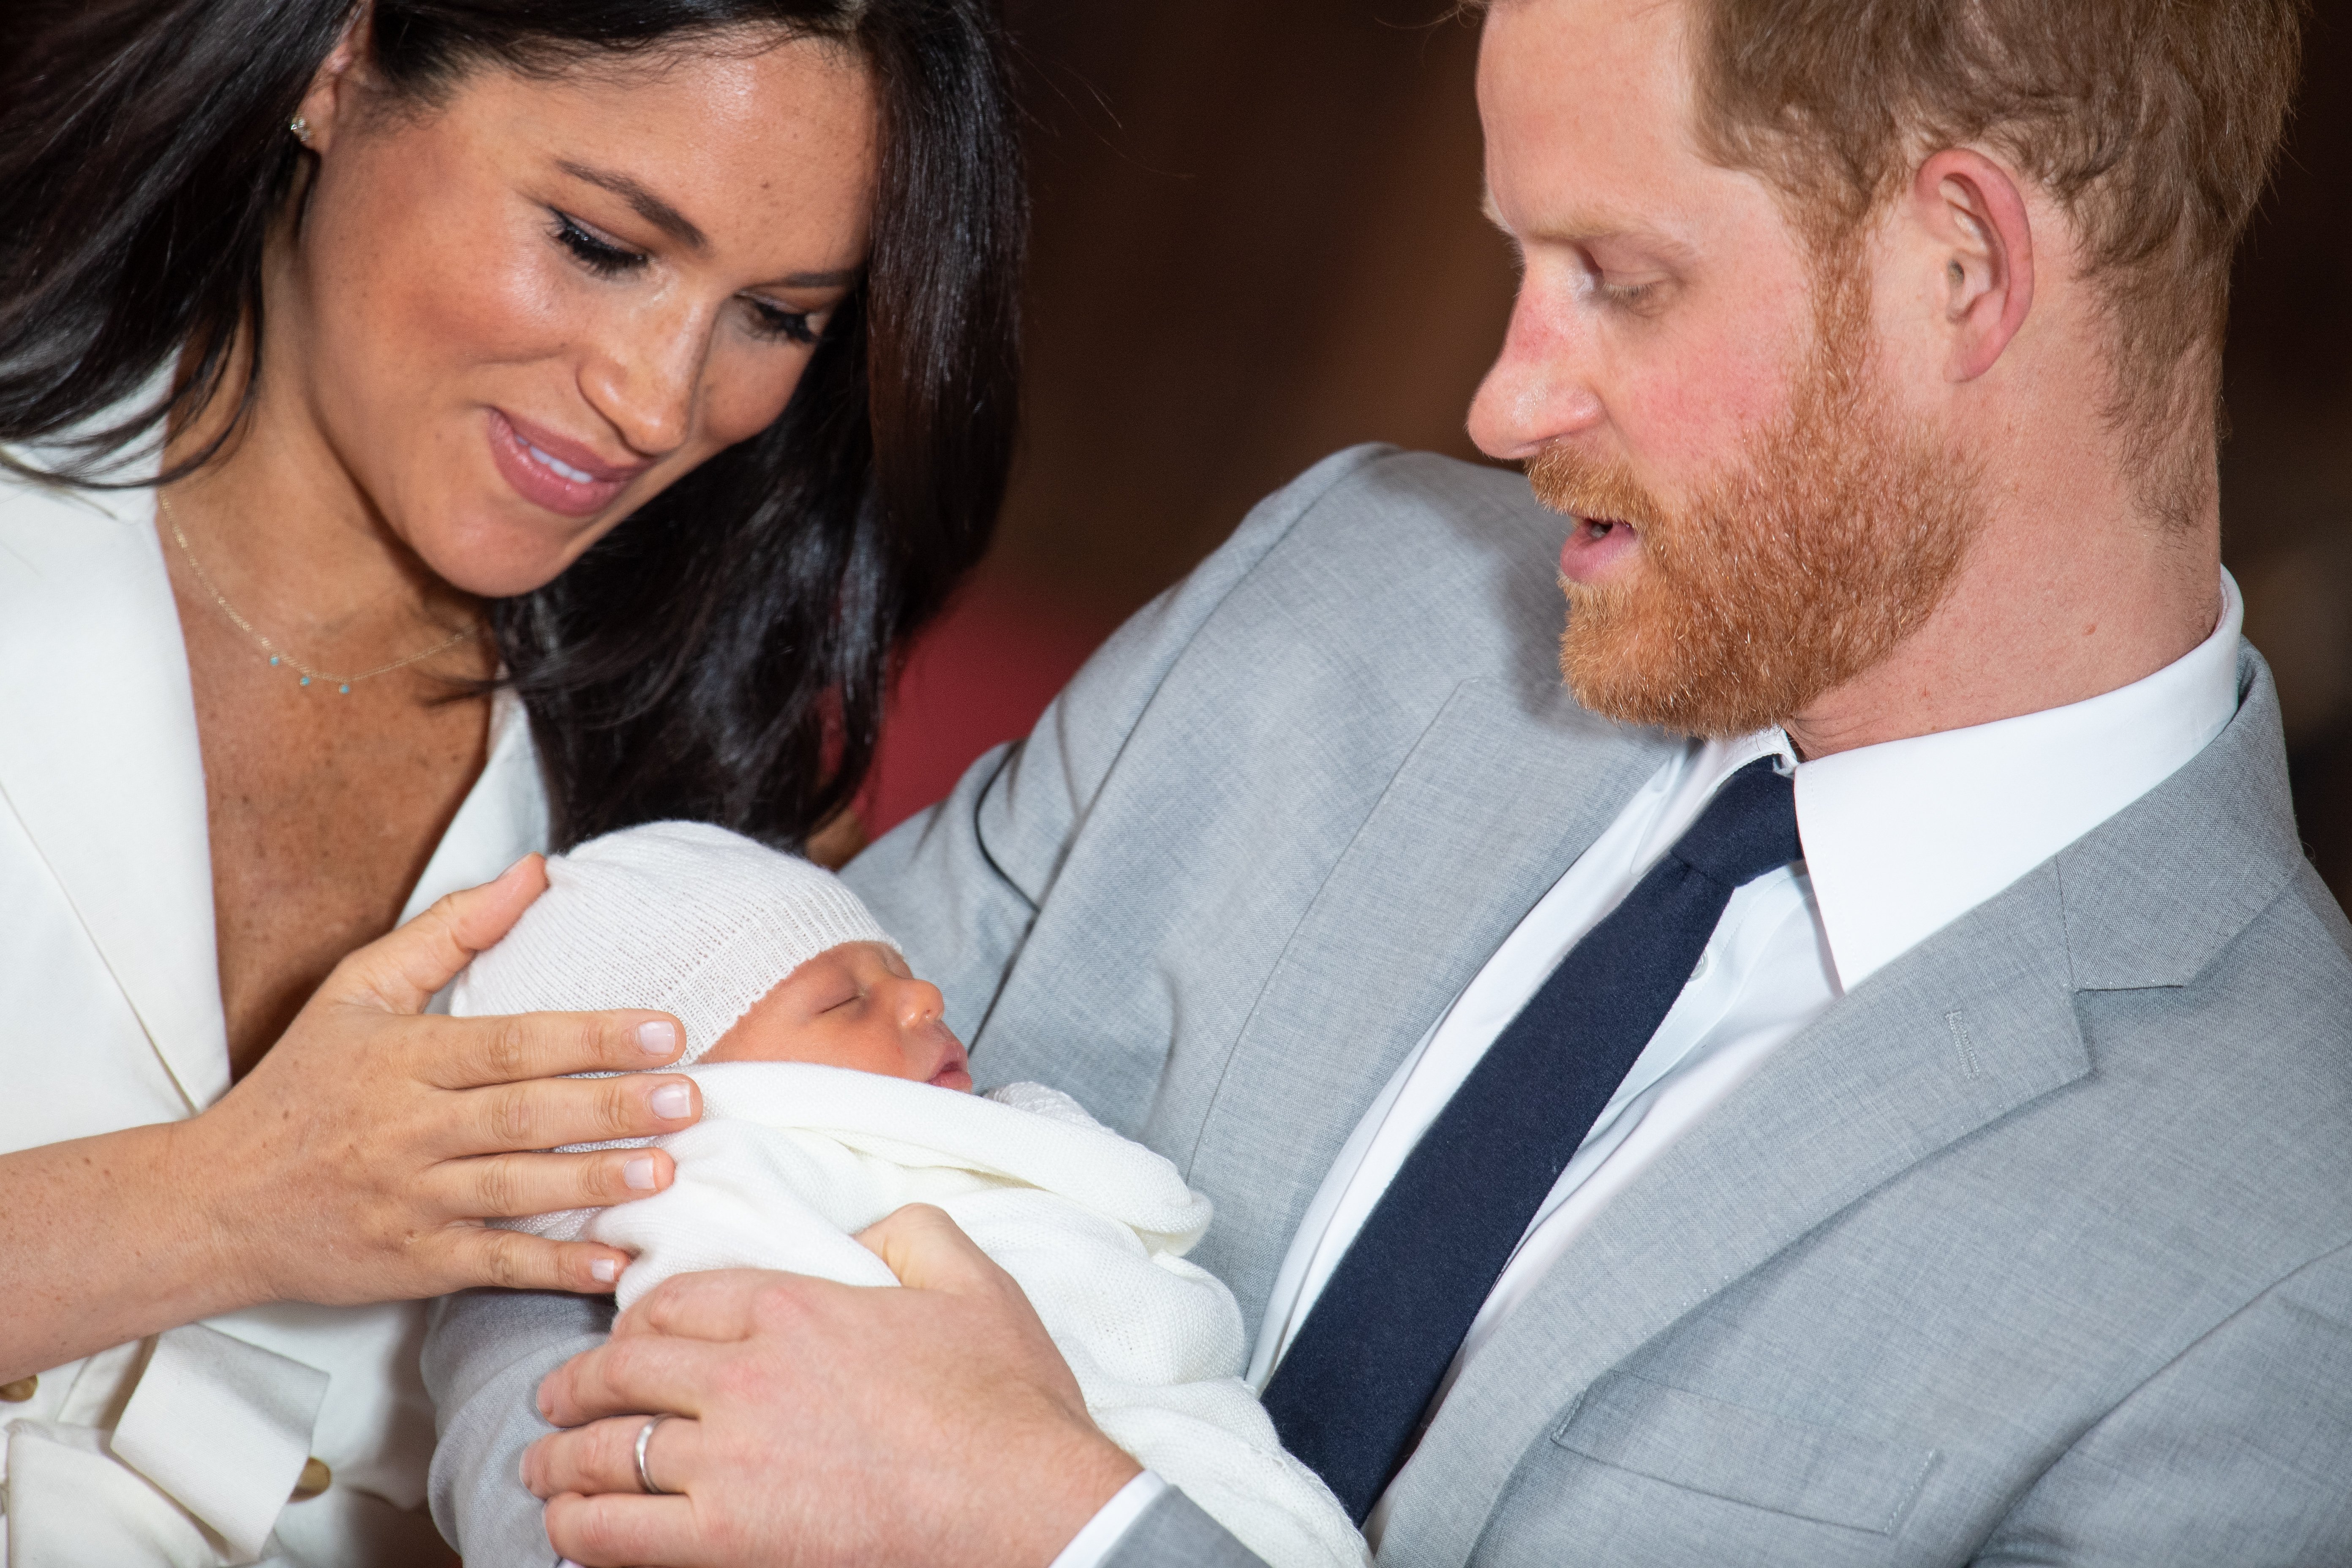 Prince Harry and Meghan Markle posing with their newborn son Archie Harrison Mountbatten-Windsor during a photocall in St George's Hall at Windsor Castle on May 8, 2019 in Windsor, England. / Source: Getty Images